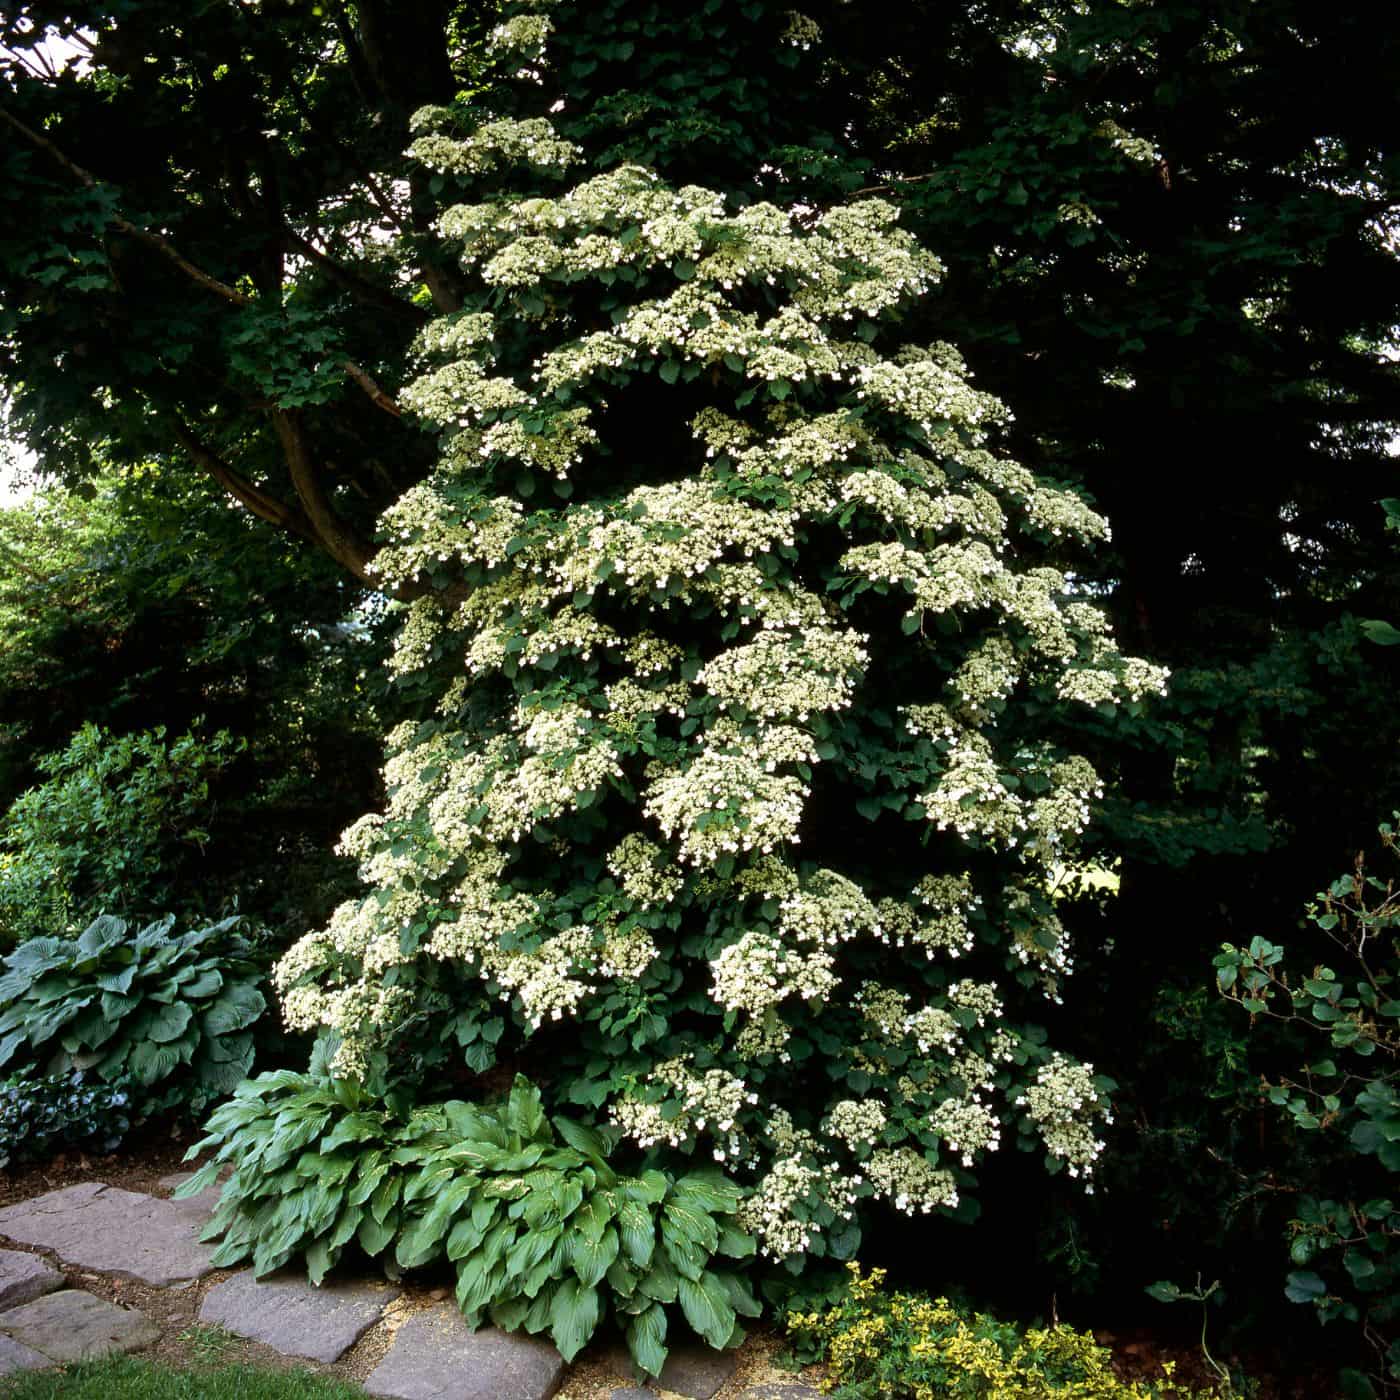 Climbing hydrangea in the garden with hostas and shade trees